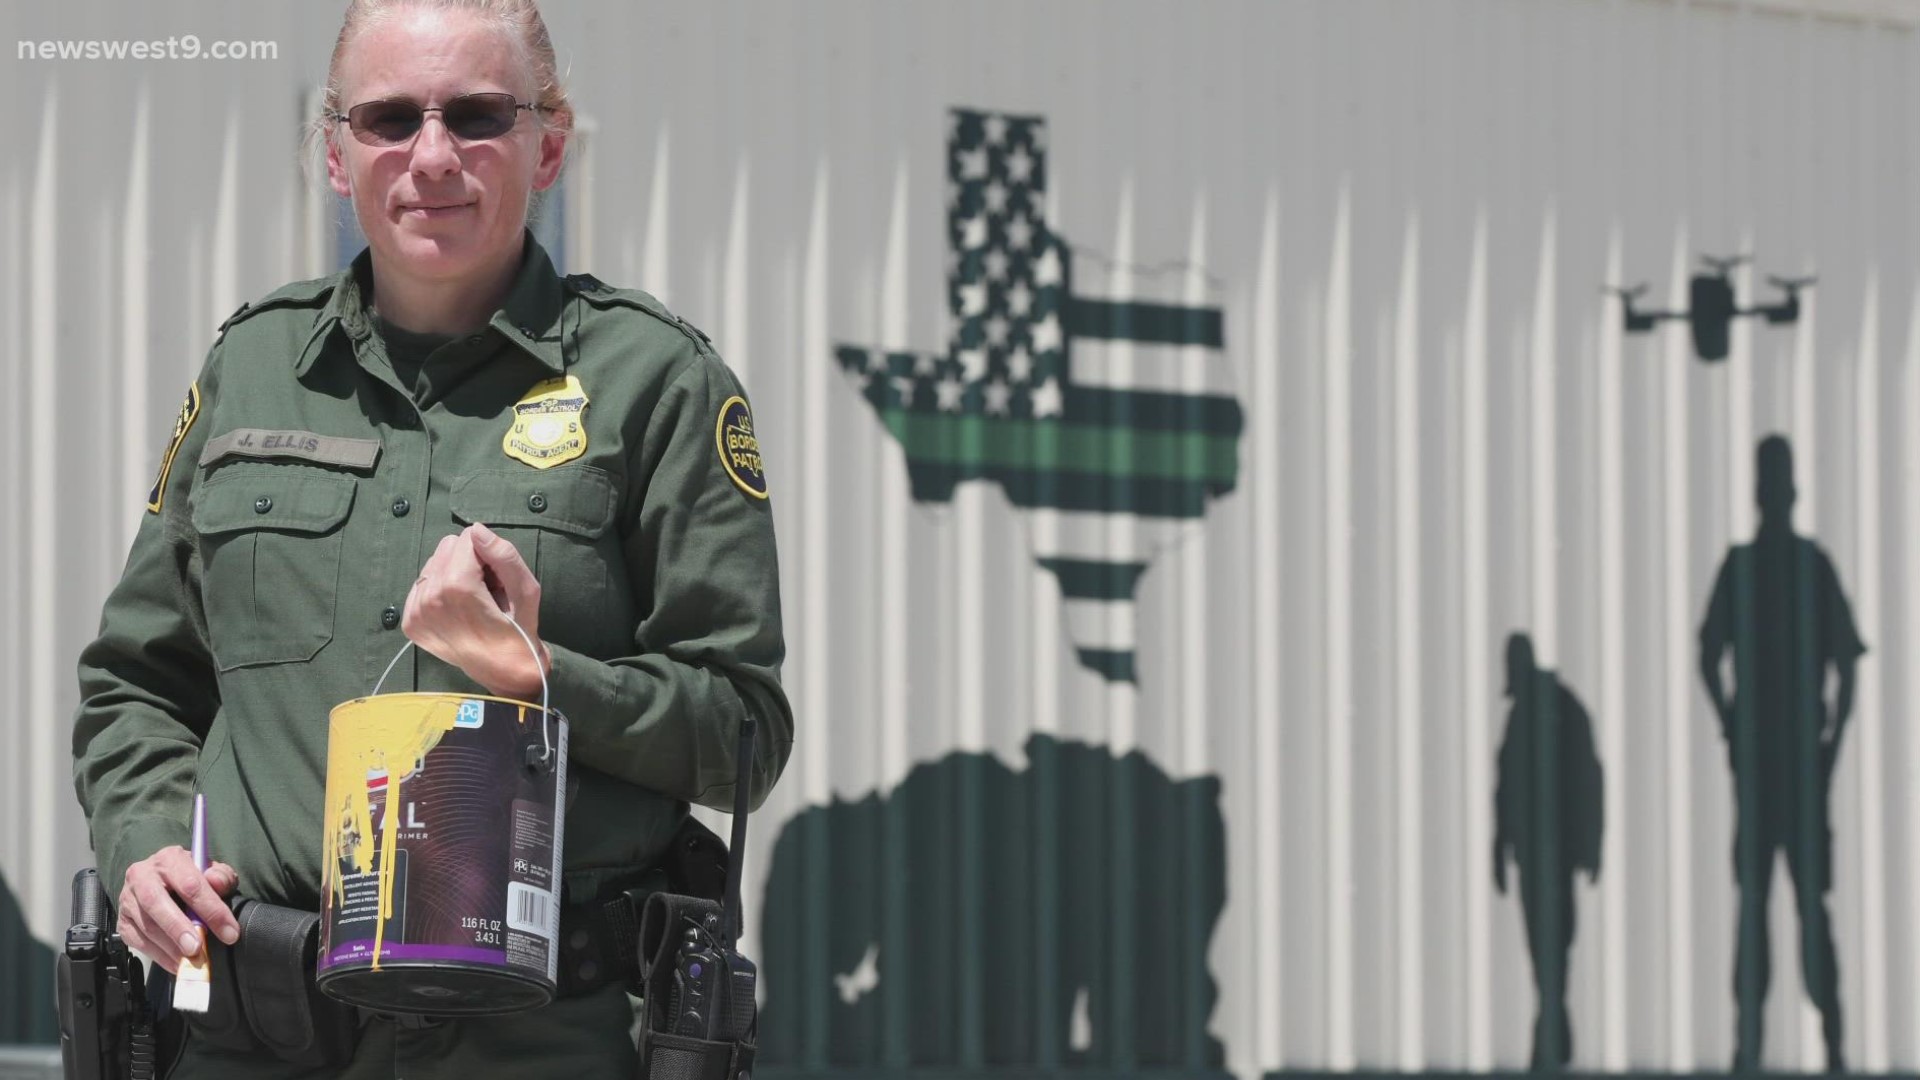 The project turned the broad side of a tan building at the Presidio Border Patrol Station into a mural representing the region and agents.